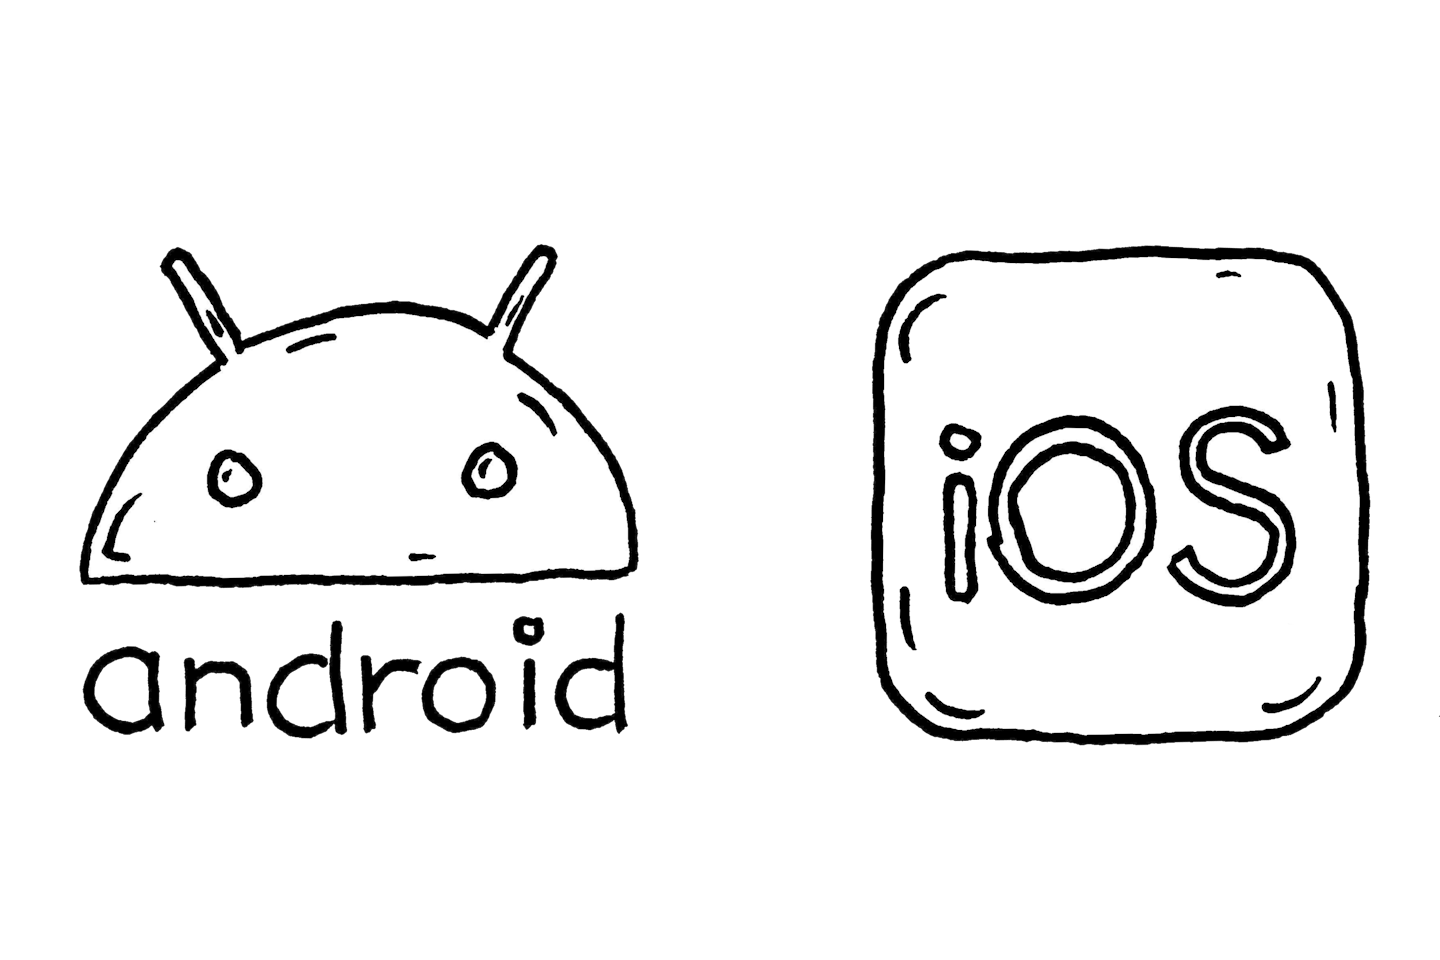 Android and i OS